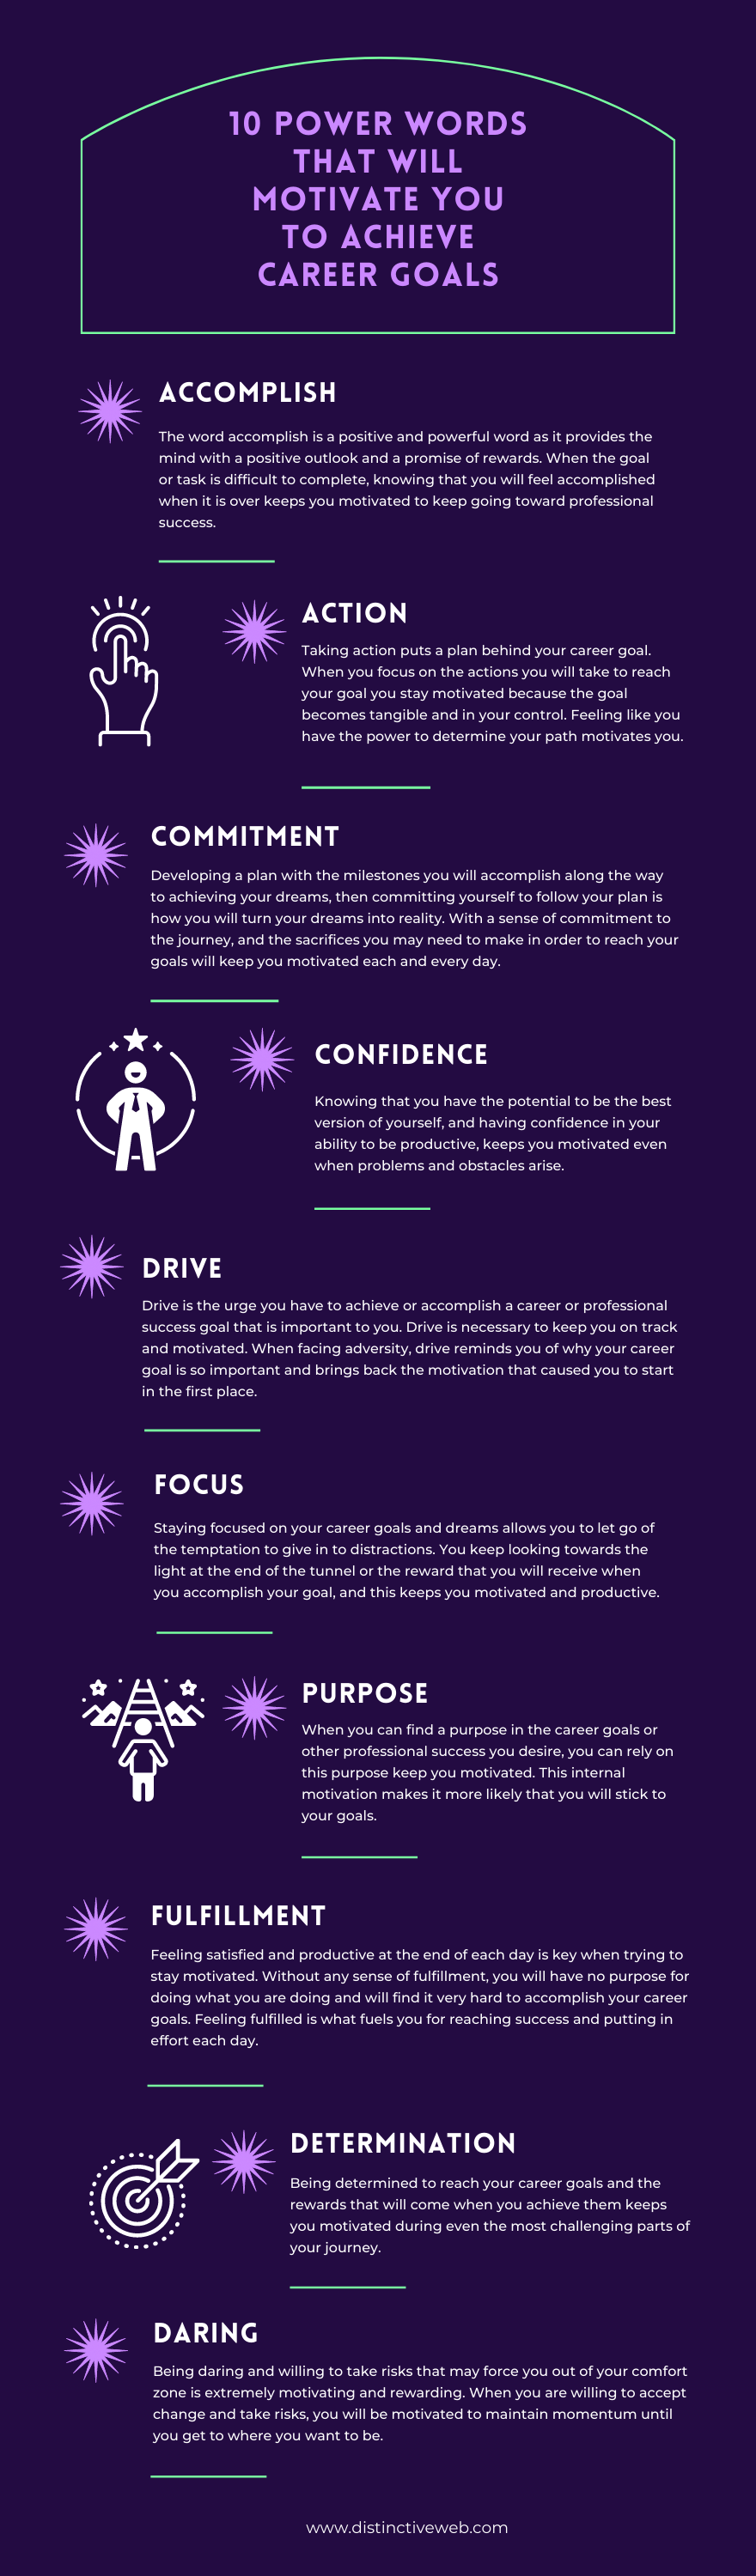 10 Power Word for Professional Success Infographic